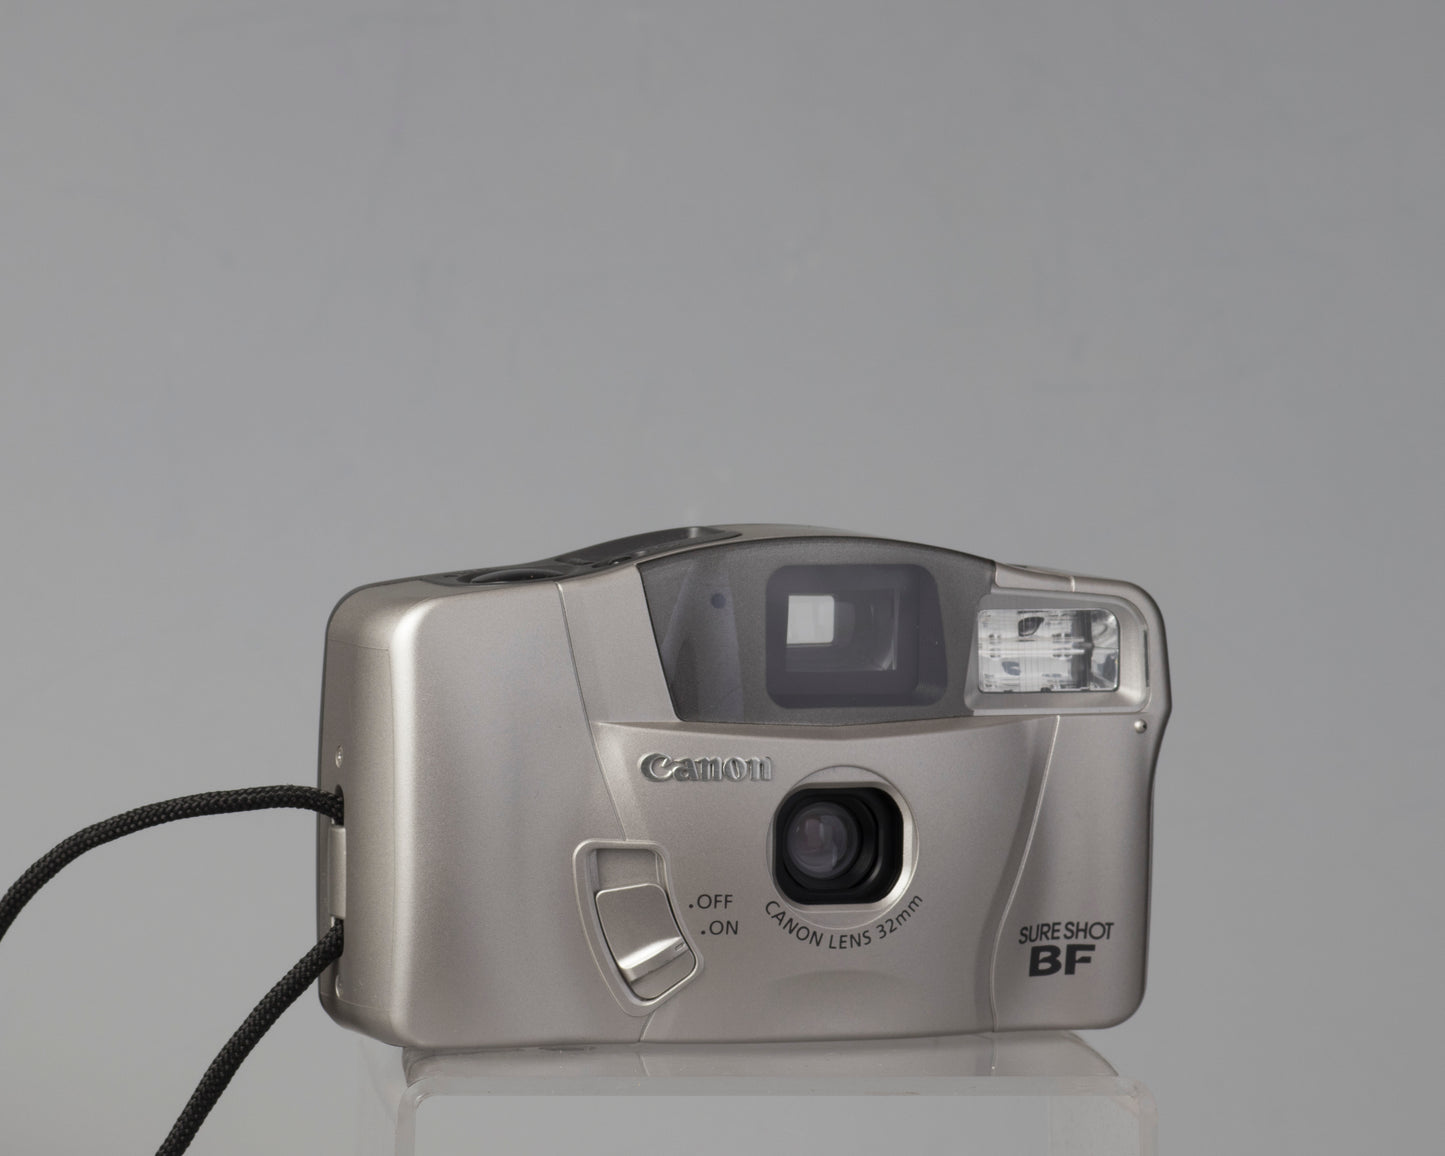 The Canon Sure Shot BF is a compact 35mm point-and-shoot with an unually large and bright viewfinder